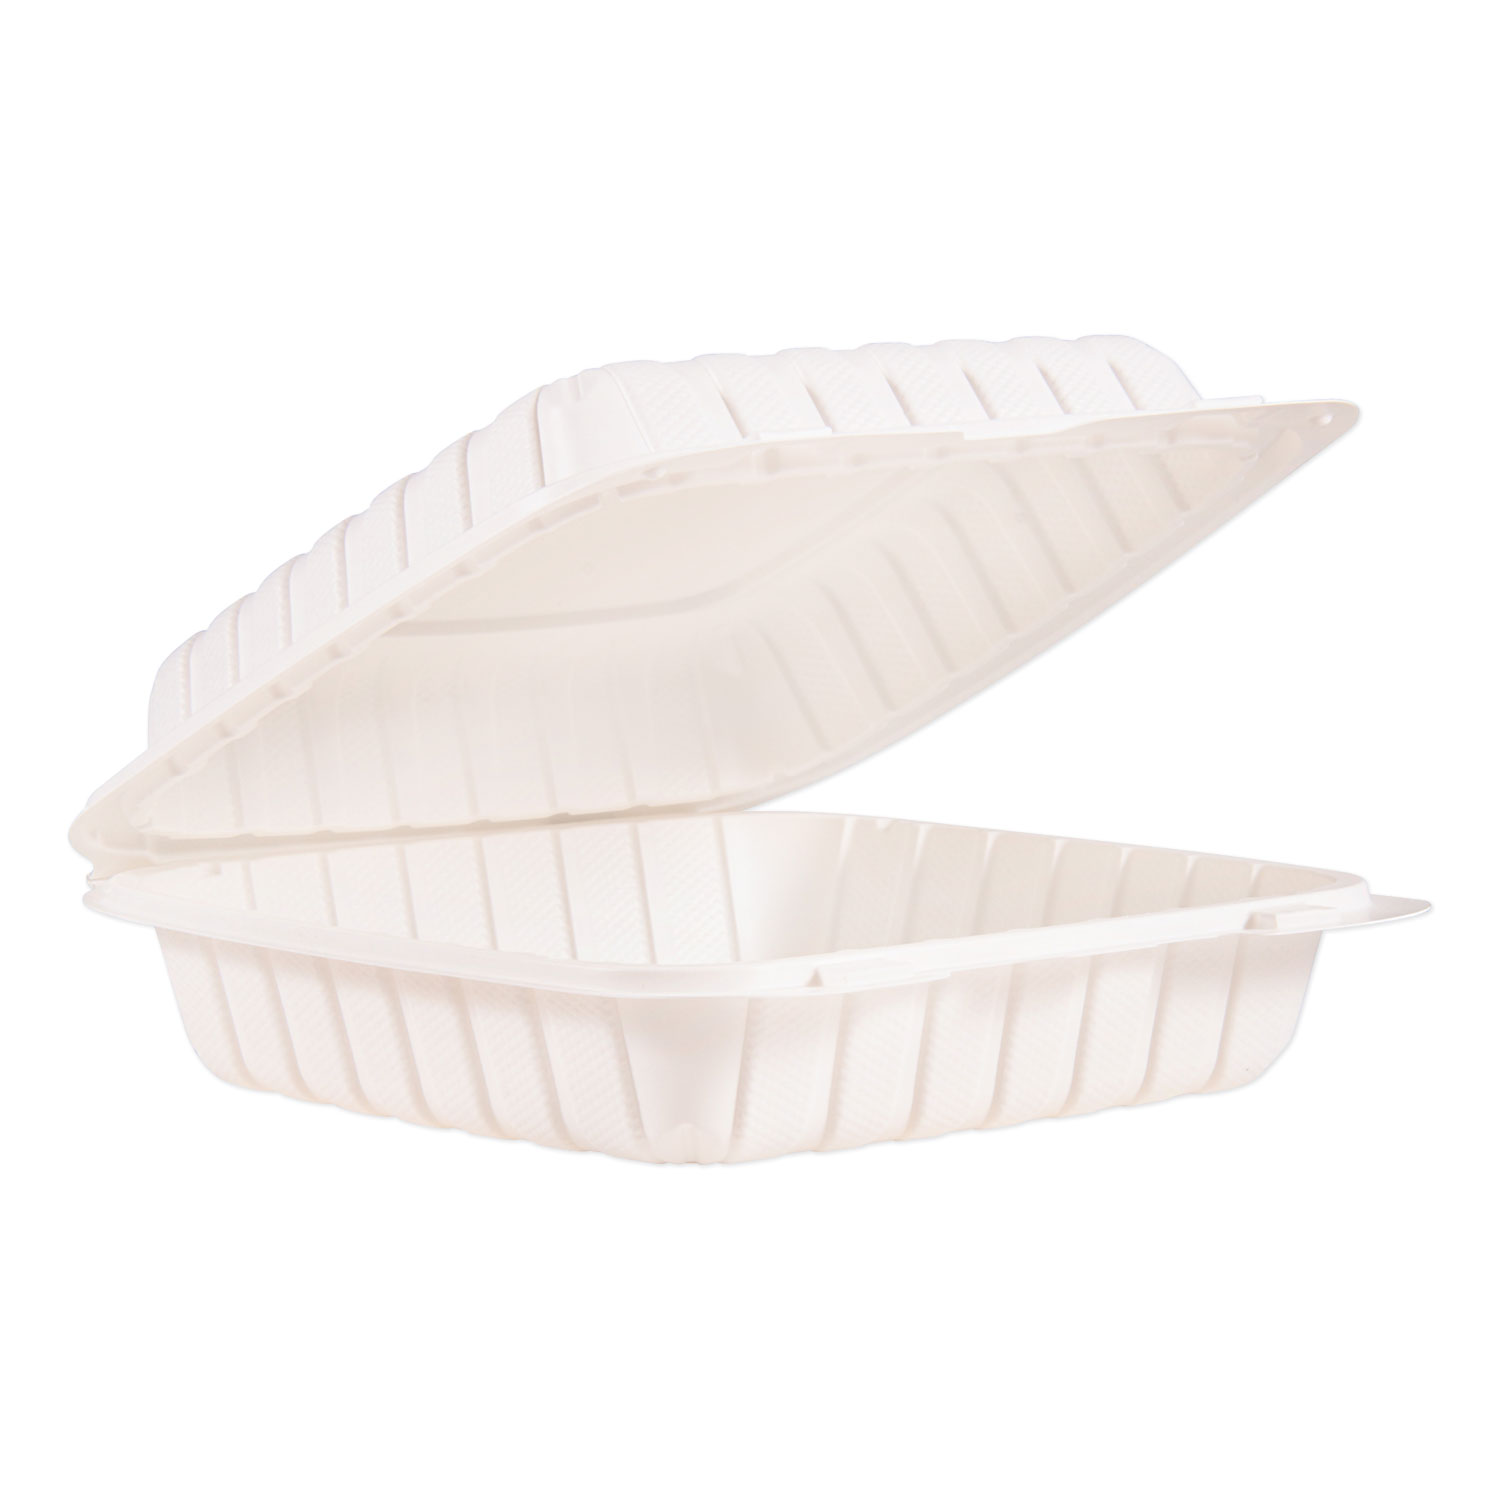 ProPlanet™ by Dart® Hinged Lid Single Compartment Containers, 9 x 8.8 x 3, White, 150/Carton